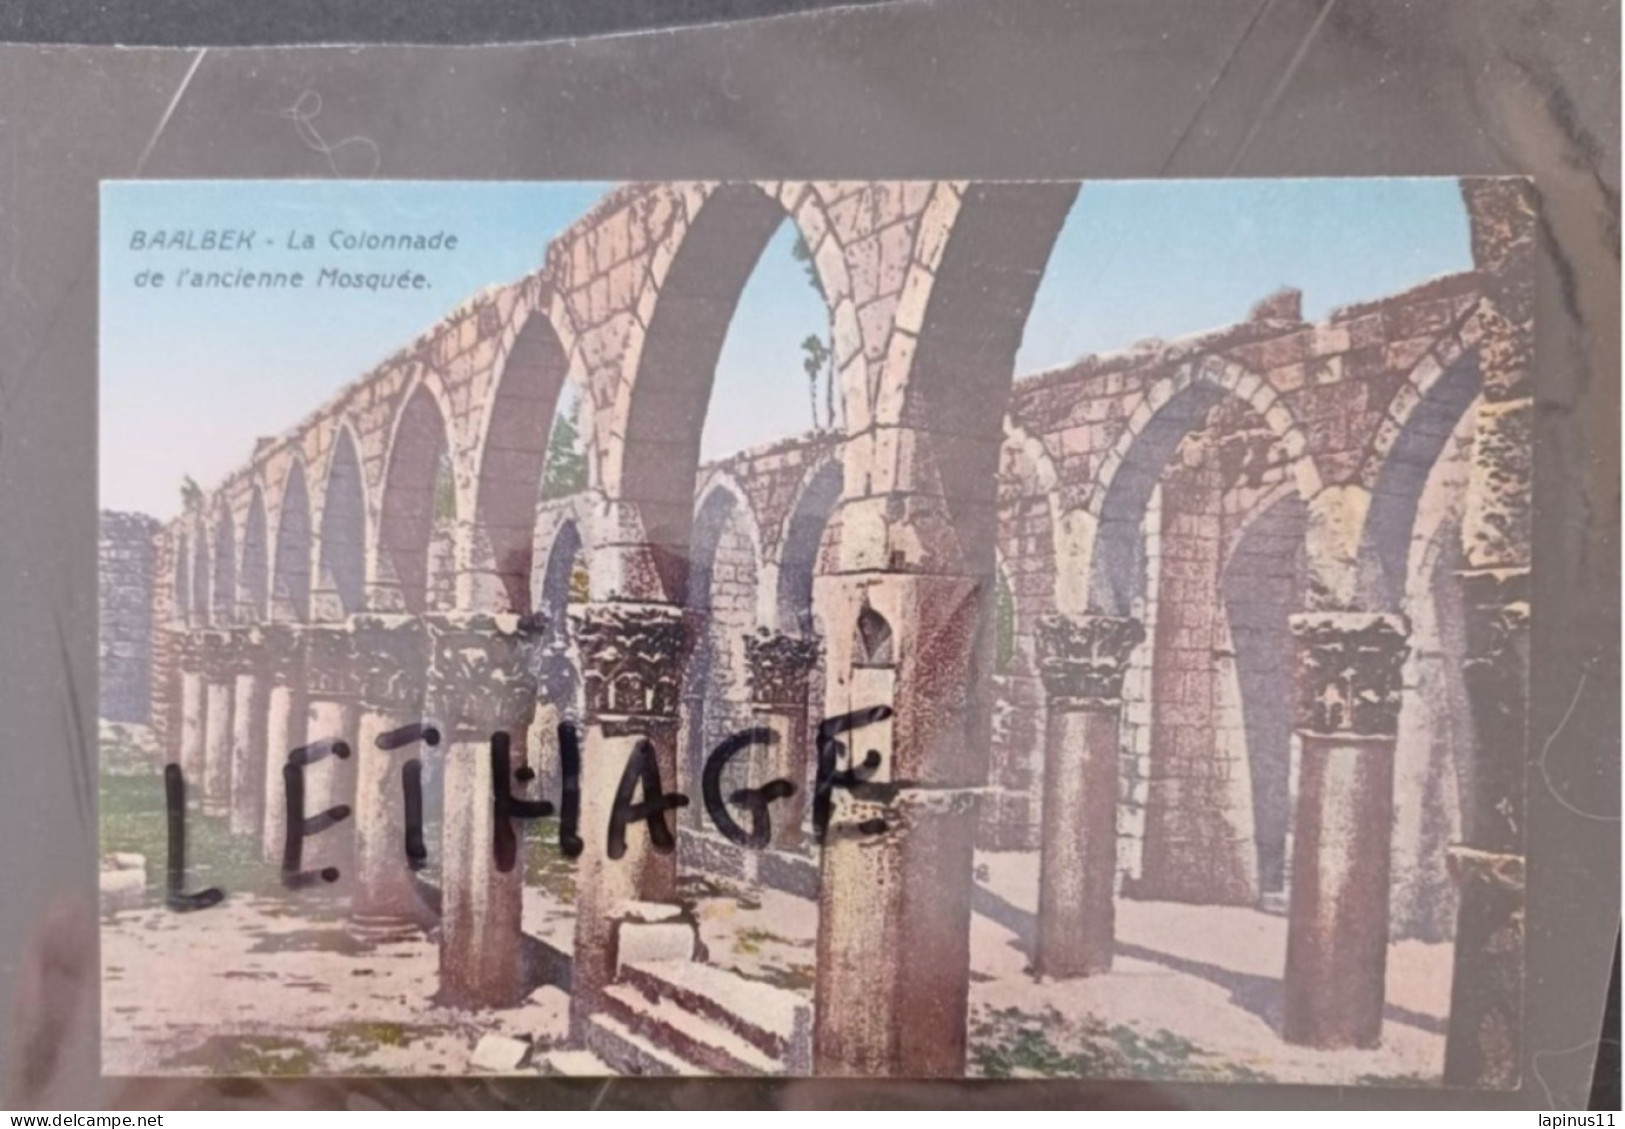 LIBAN BAALBECK COLONNADE MOSQUEE POSTCARD NEW TYPOGRAPHIC PRINT PRODUCED BY SARRAFIAN BROS BEIRUT (COLLECTOR'S)#1/169 - Líbano